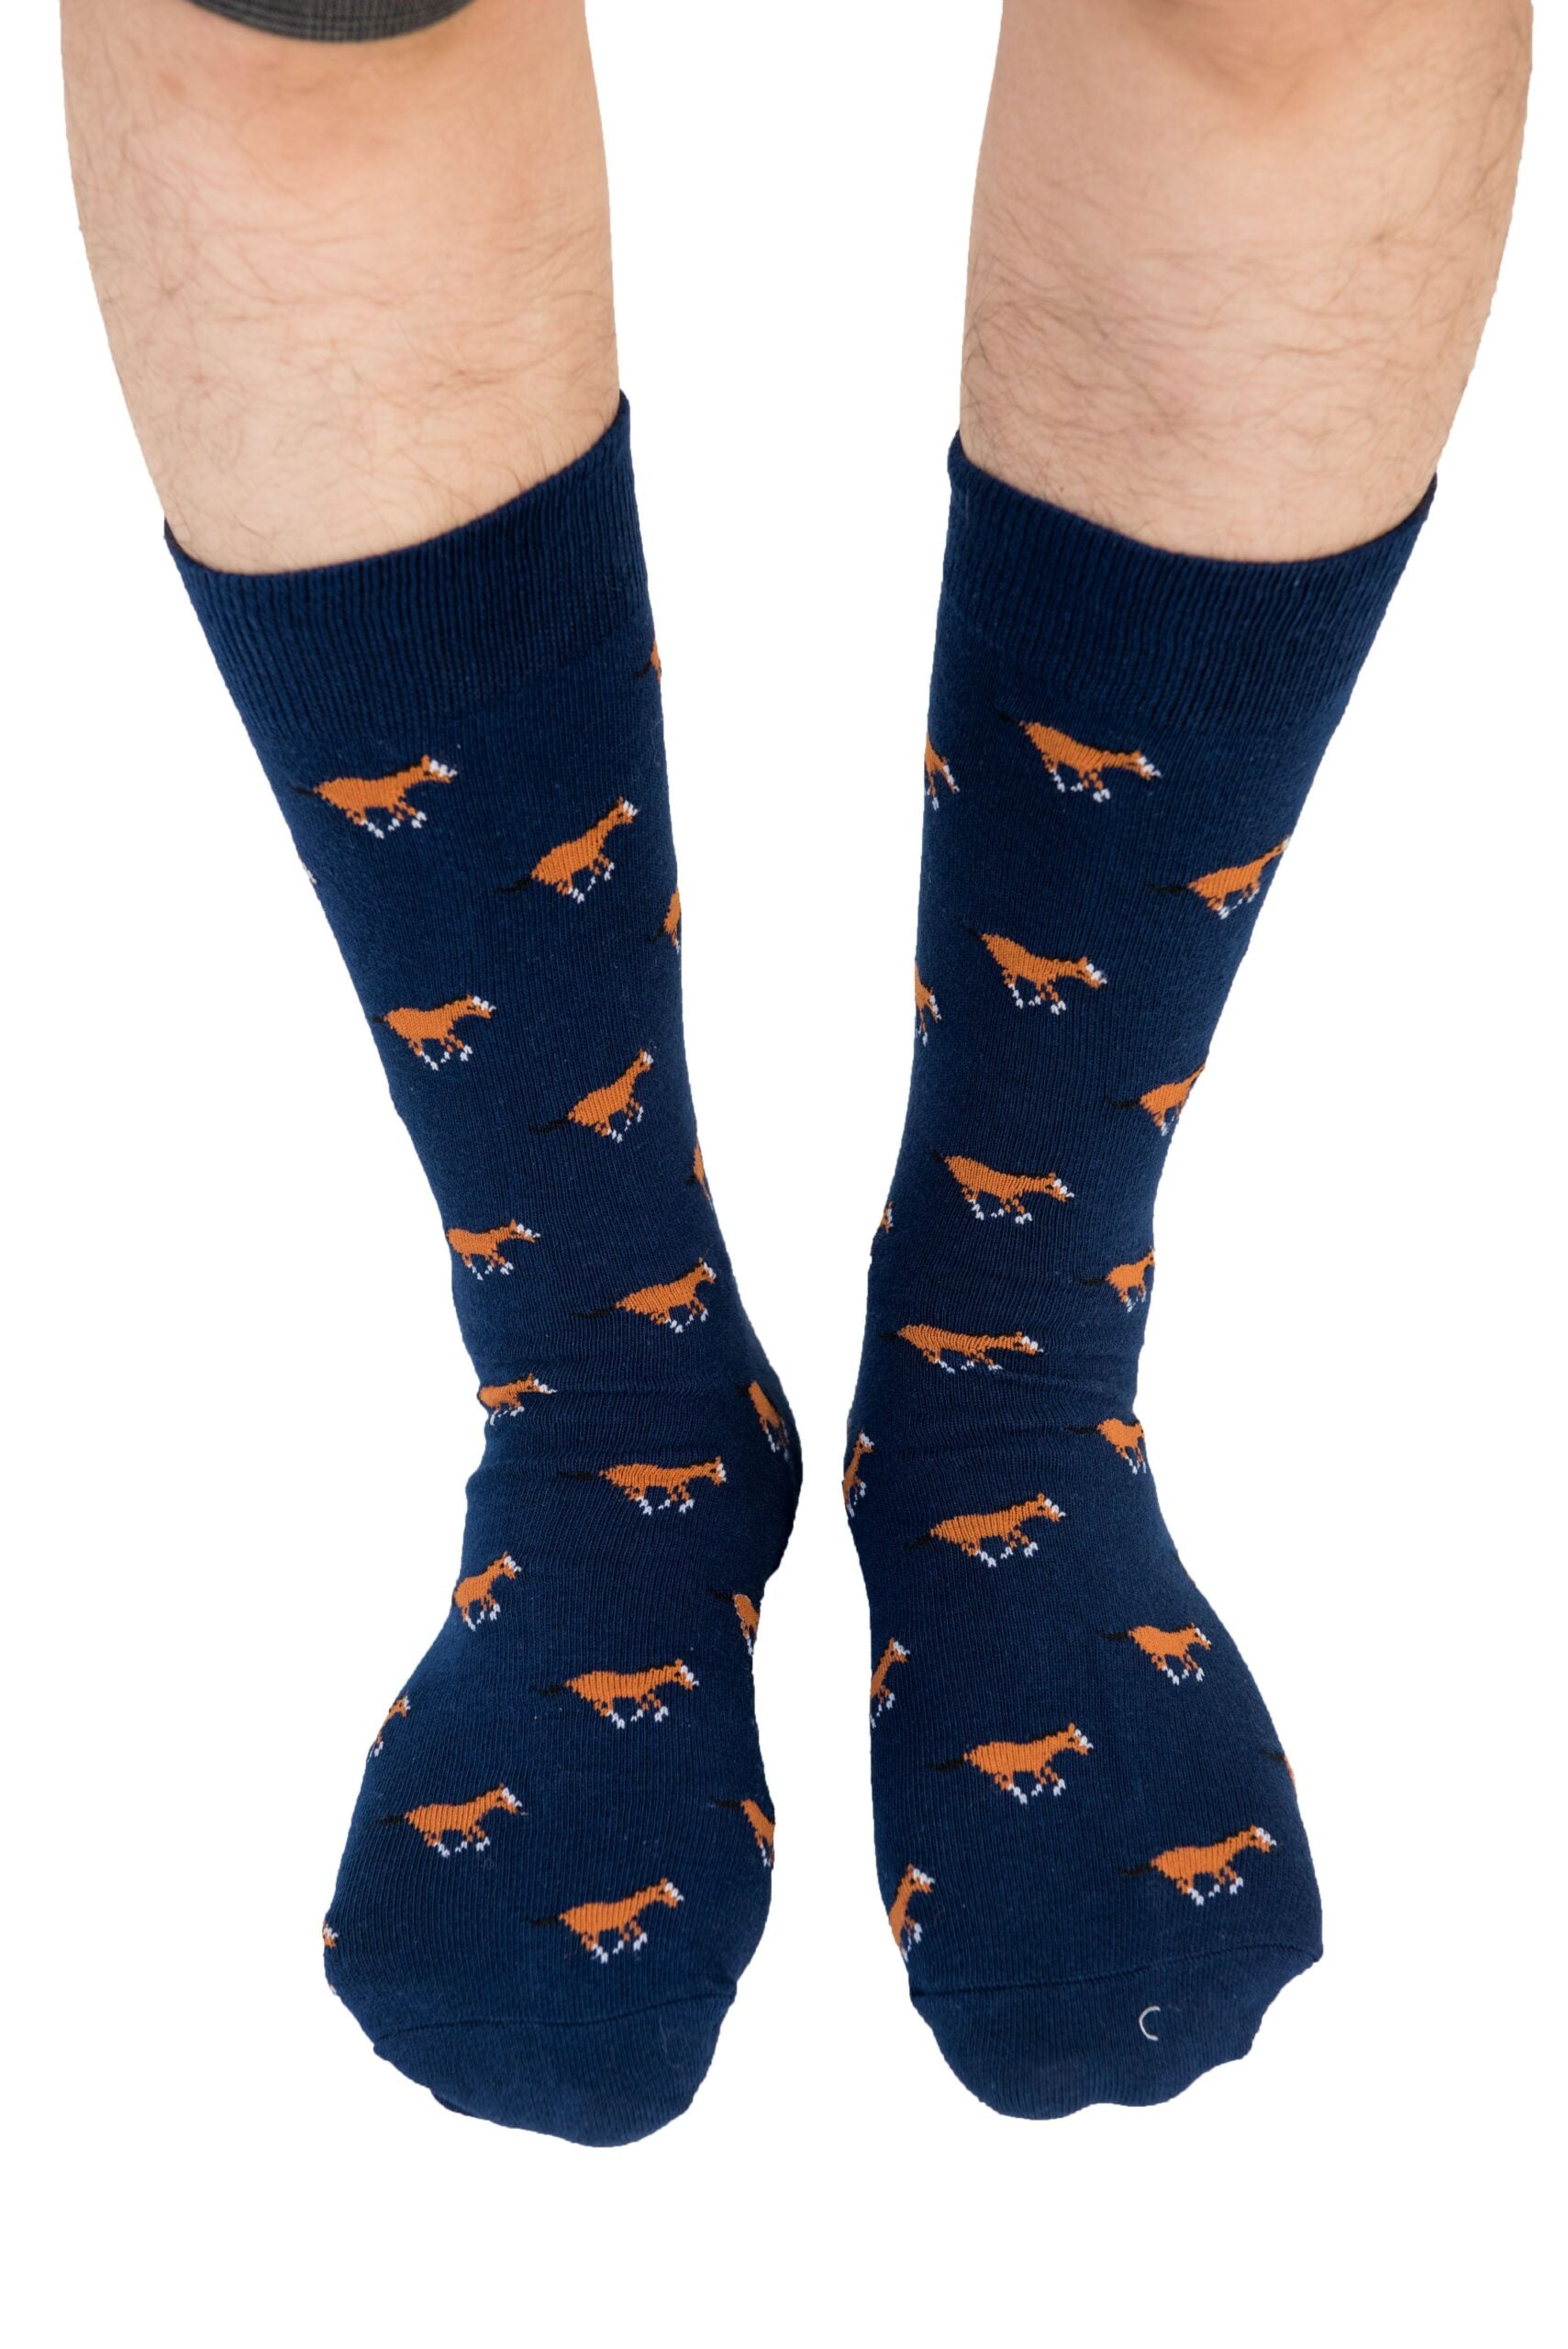 A man wearing Horse Socks with orange foxes.